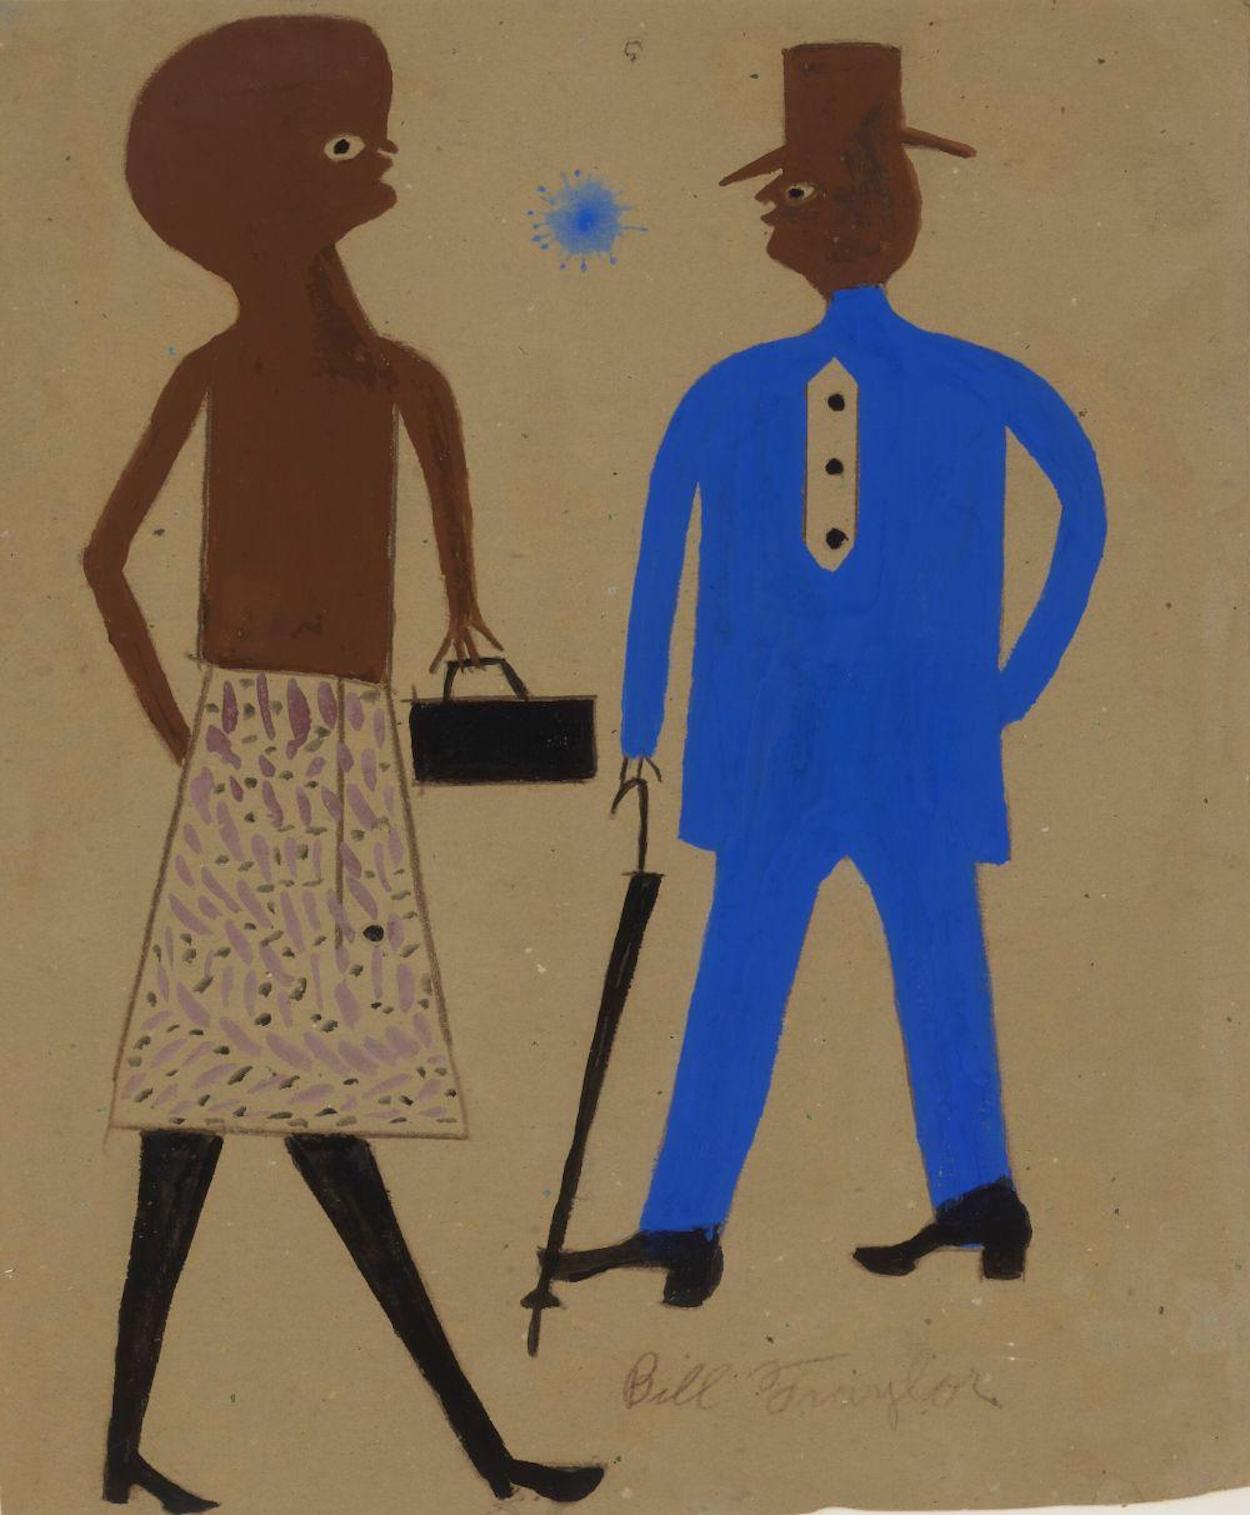 Untitled (Man and Woman) by Bill Traylor - 1939-1942 - 38 x 32 cm private collection